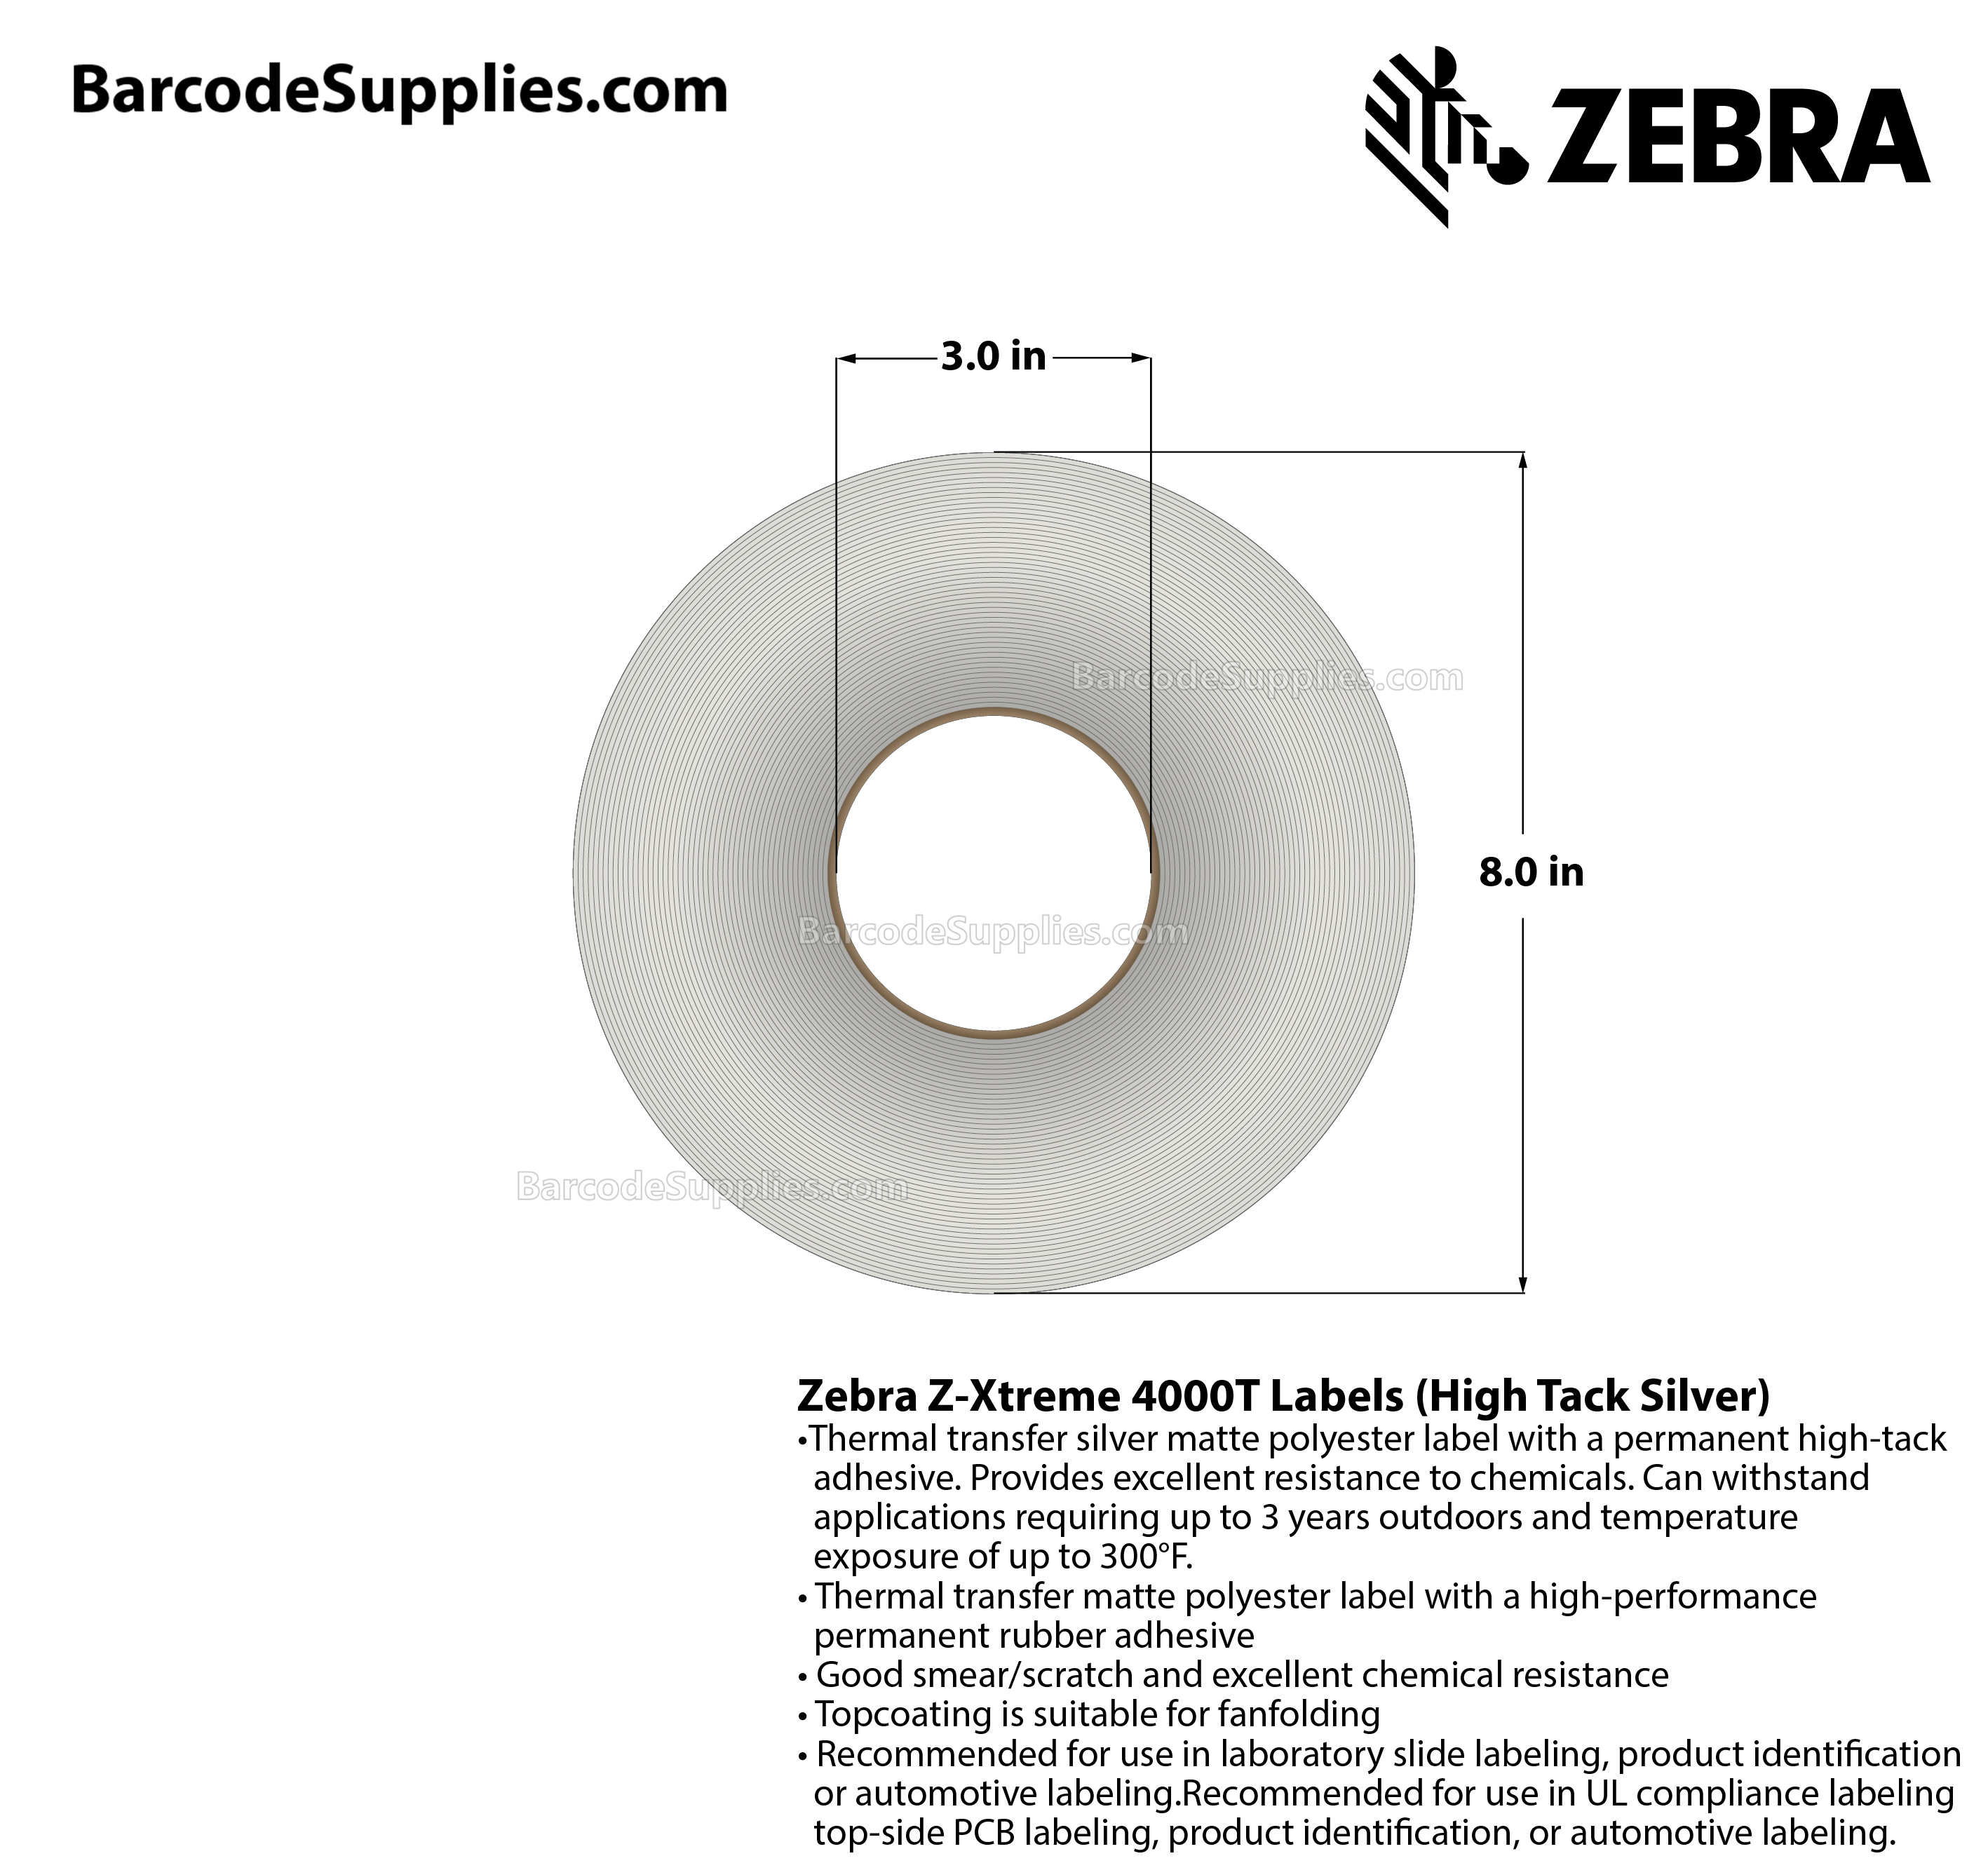 2 x 0.5 Thermal Transfer Silver Z-Xtreme 4000T High-Tack Silver Labels With High-tack Adhesive - Perforated - 3000 Labels Per Roll - Carton Of 1 Rolls - 3000 Labels Total - MPN: 10023173